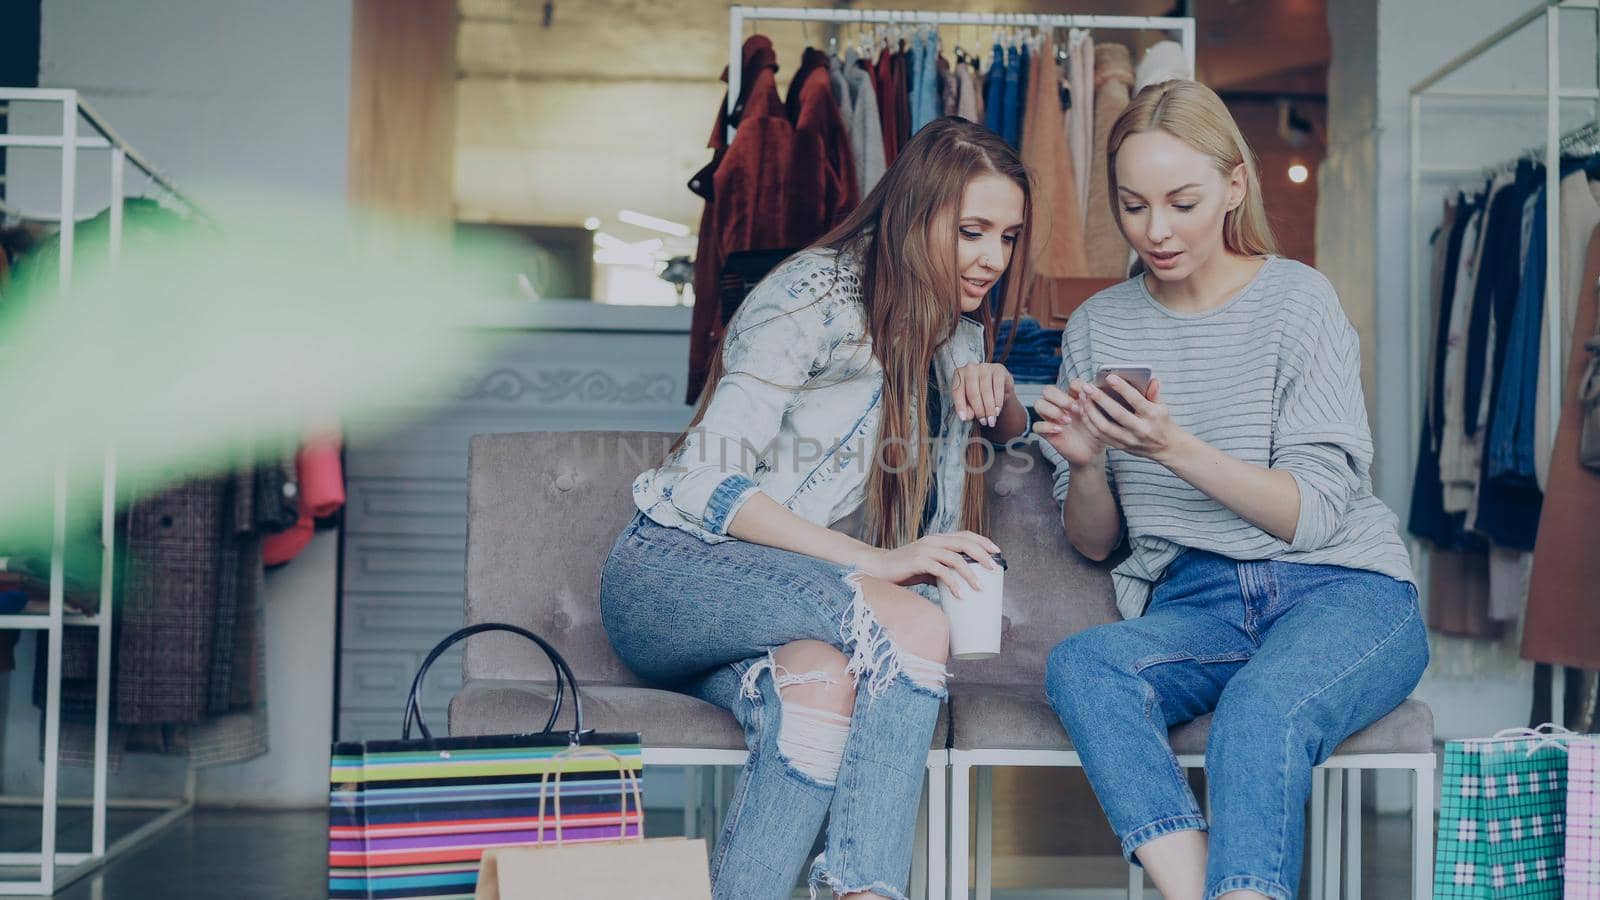 Attractive female friends talking and checking smartphone while sitting is modern shopping center. Colourful women's clothing, shelves, hangers and paperbags in background.